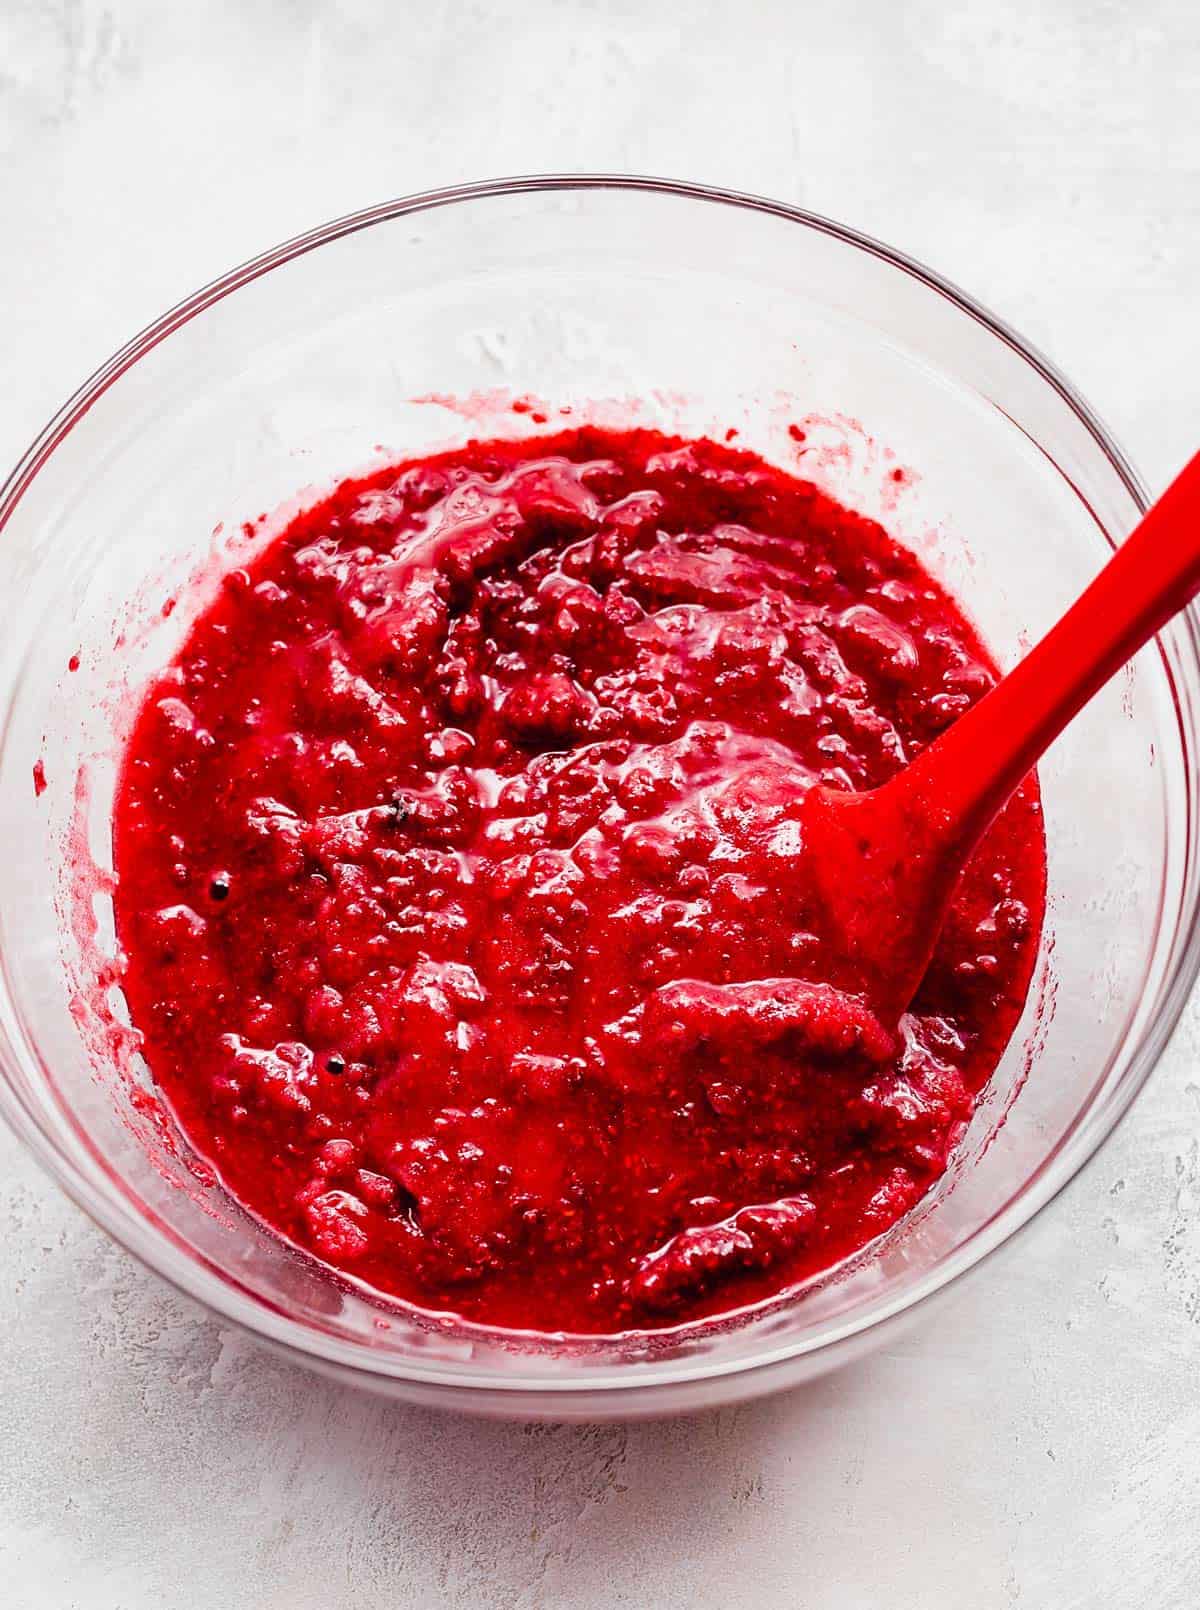 A red raspberry sauce in a glass bowl.